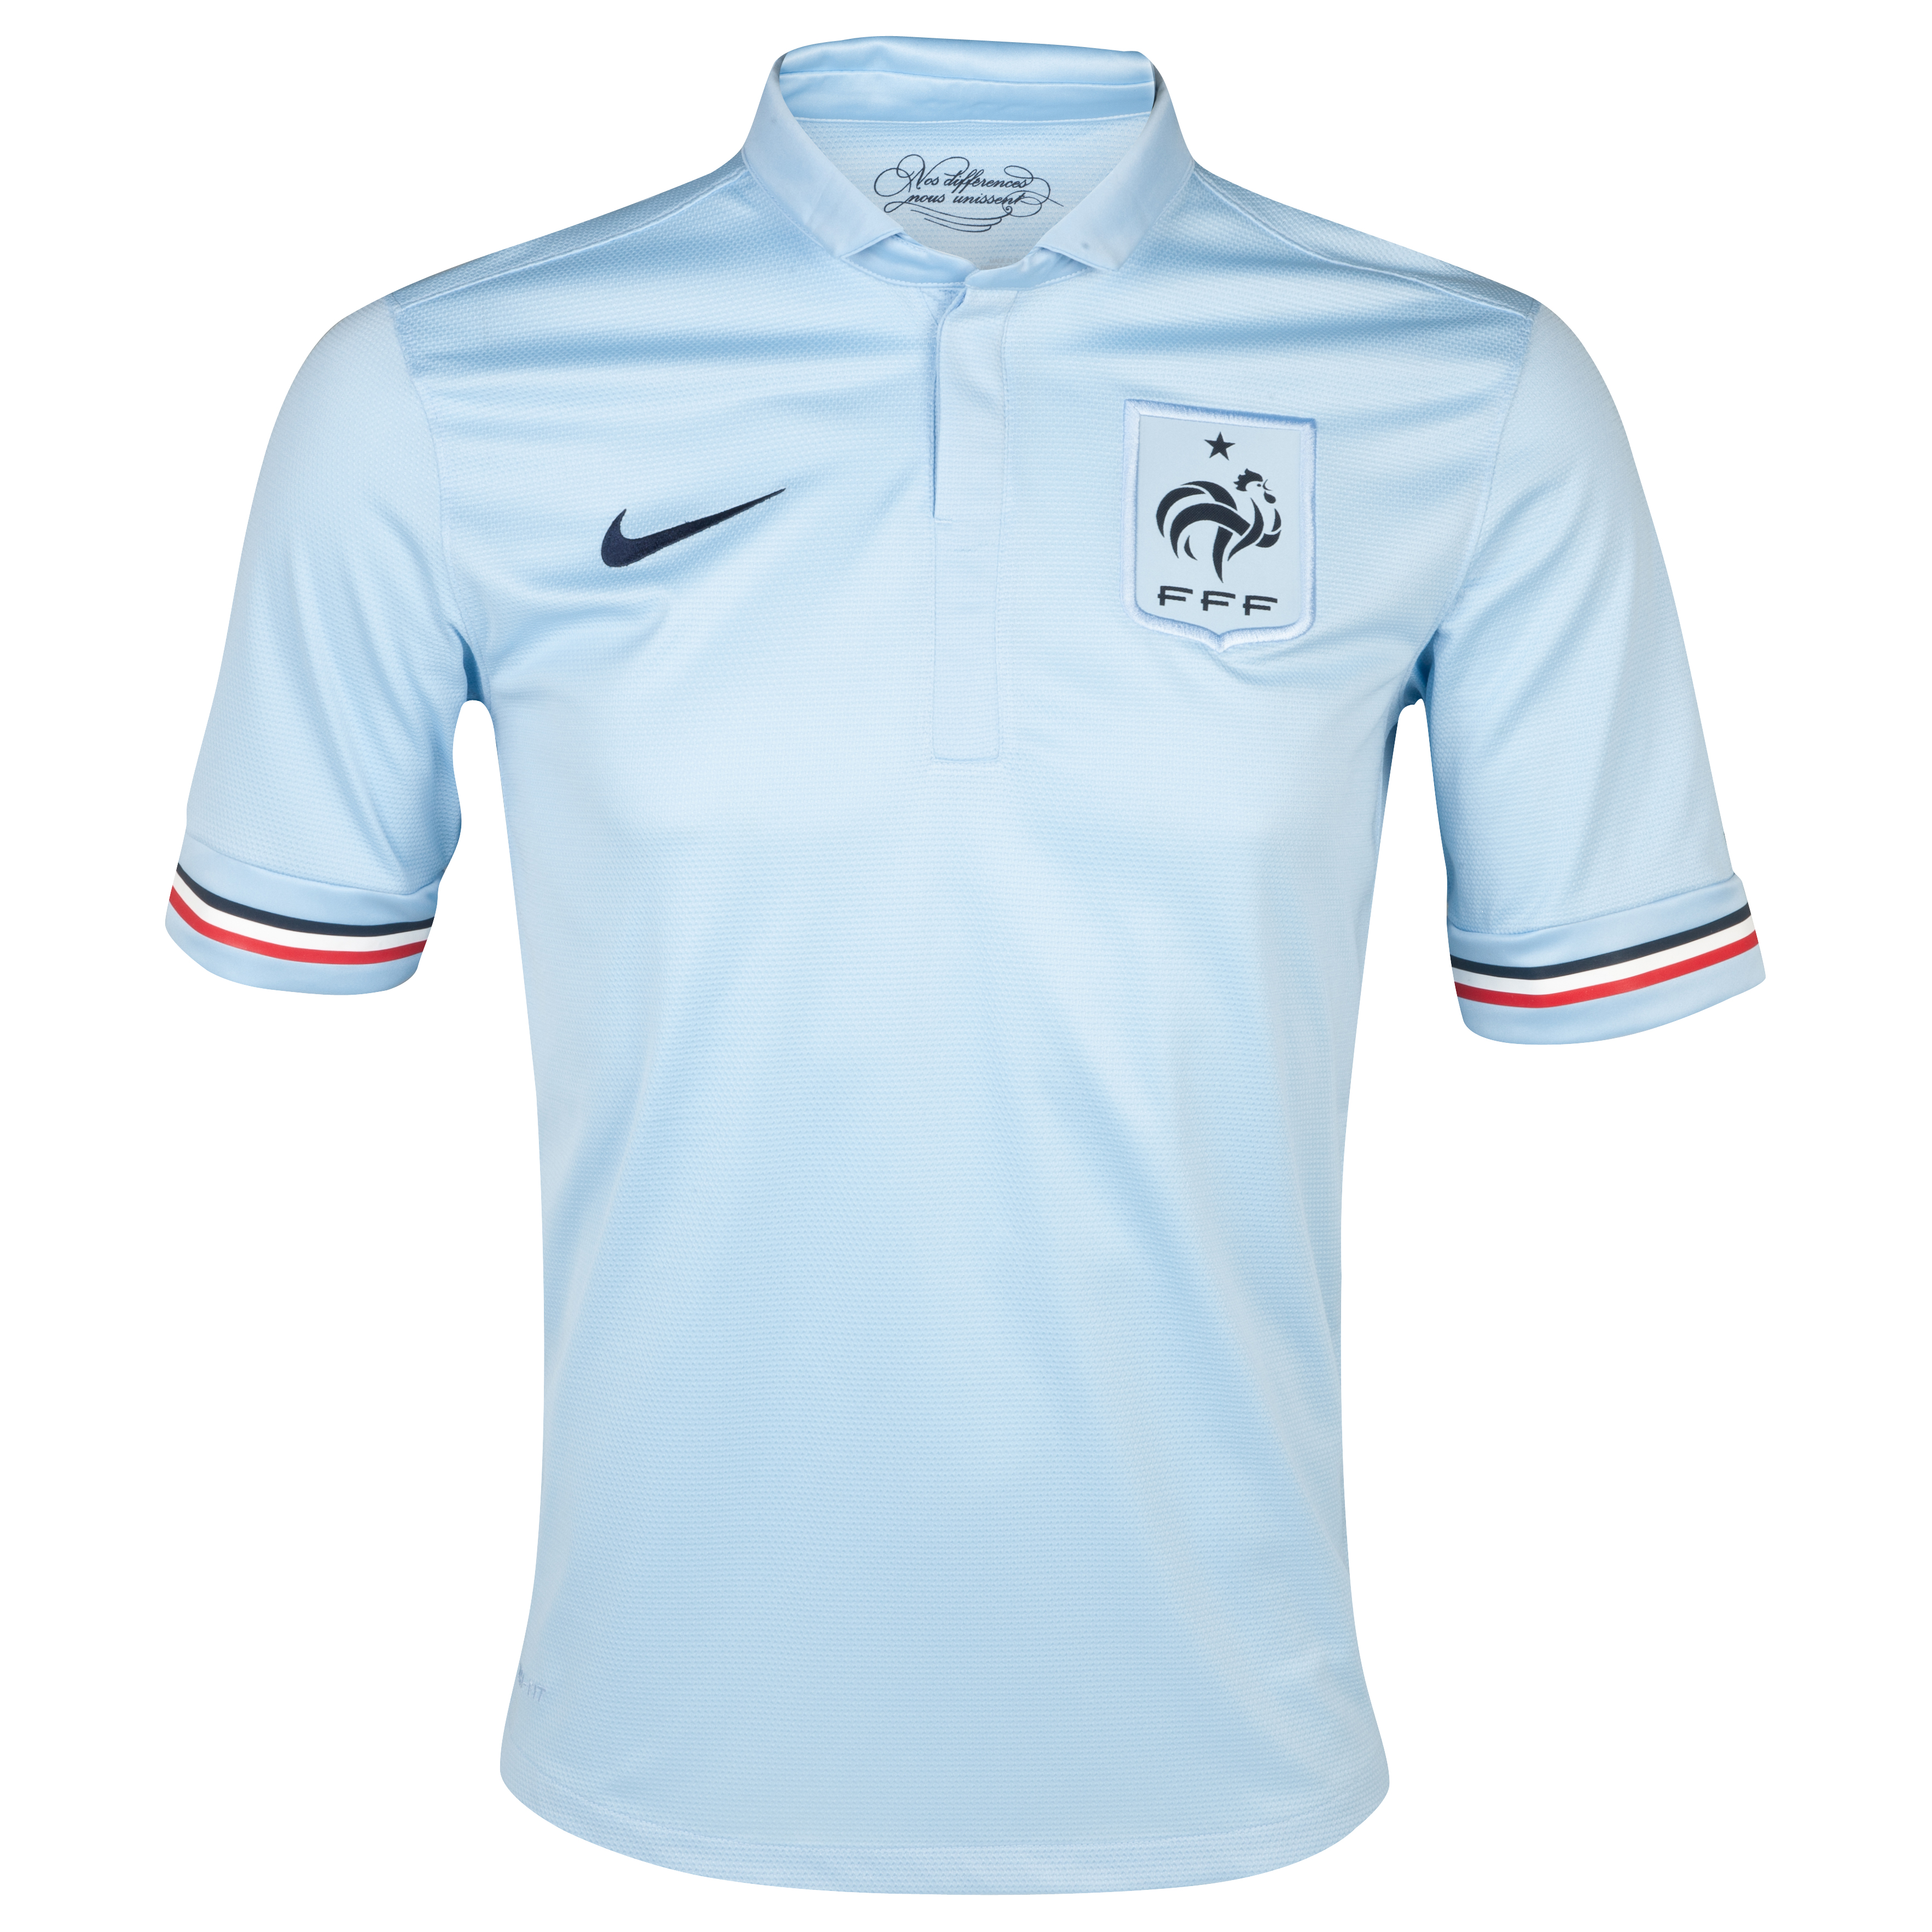 France Away Shirt 2013/14 - Youths